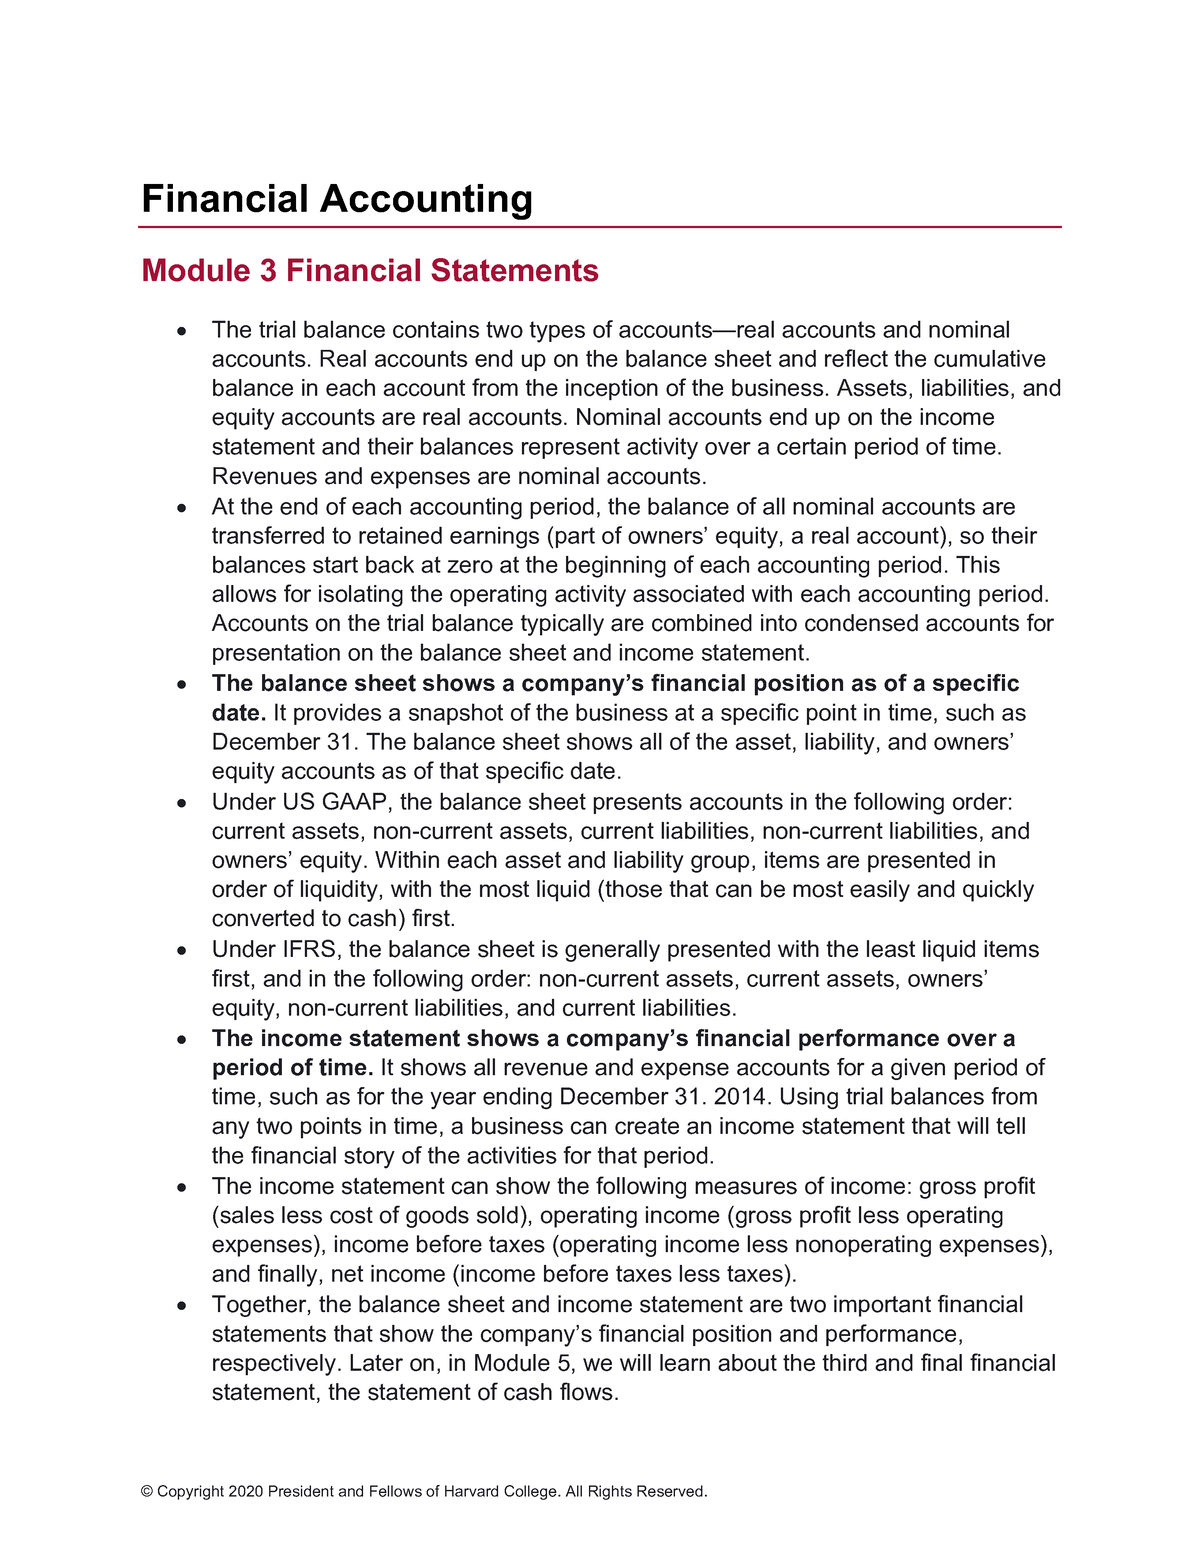 Financial Accounting Module 3 Summary - © Copyright 2020 President and  Fellows of Harvard College. - Studocu